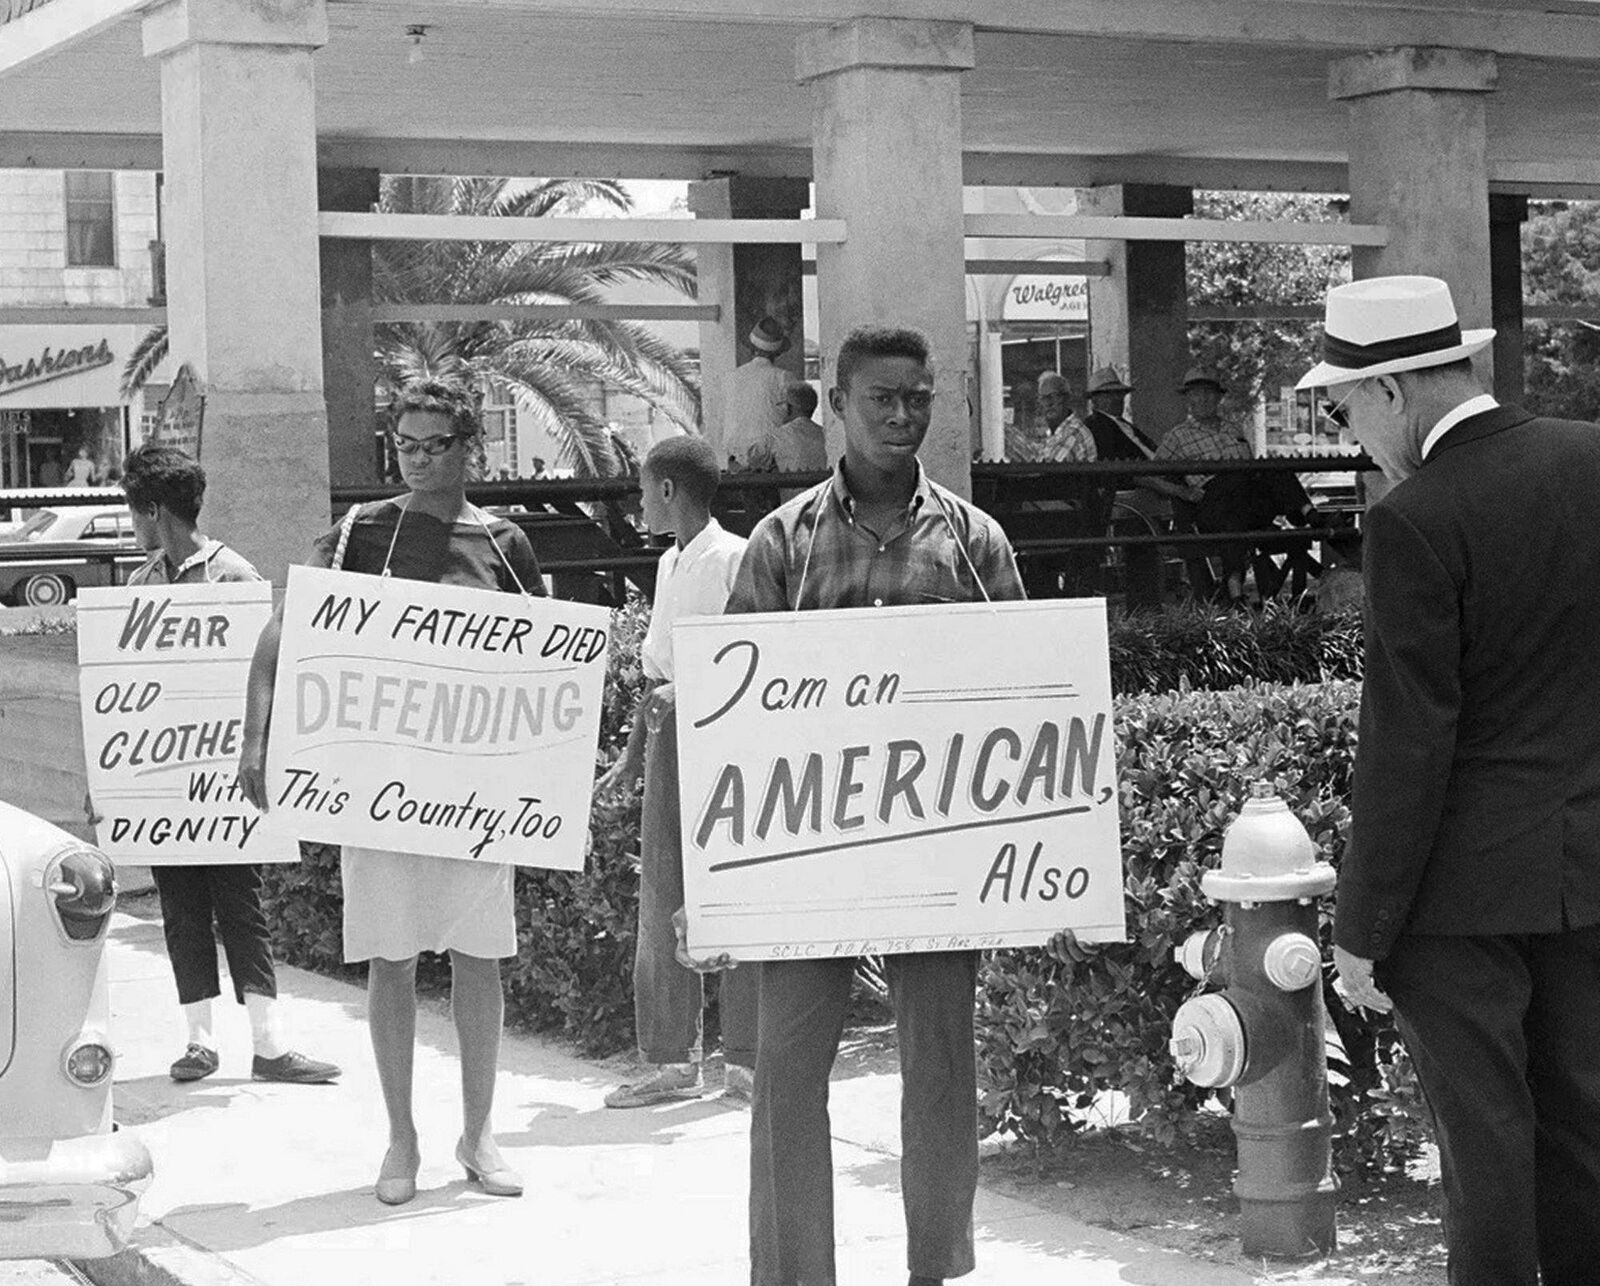 1964 ST  Augustine CIVIL RIGHTS DEMONSTRATION  Photo  (229-T)